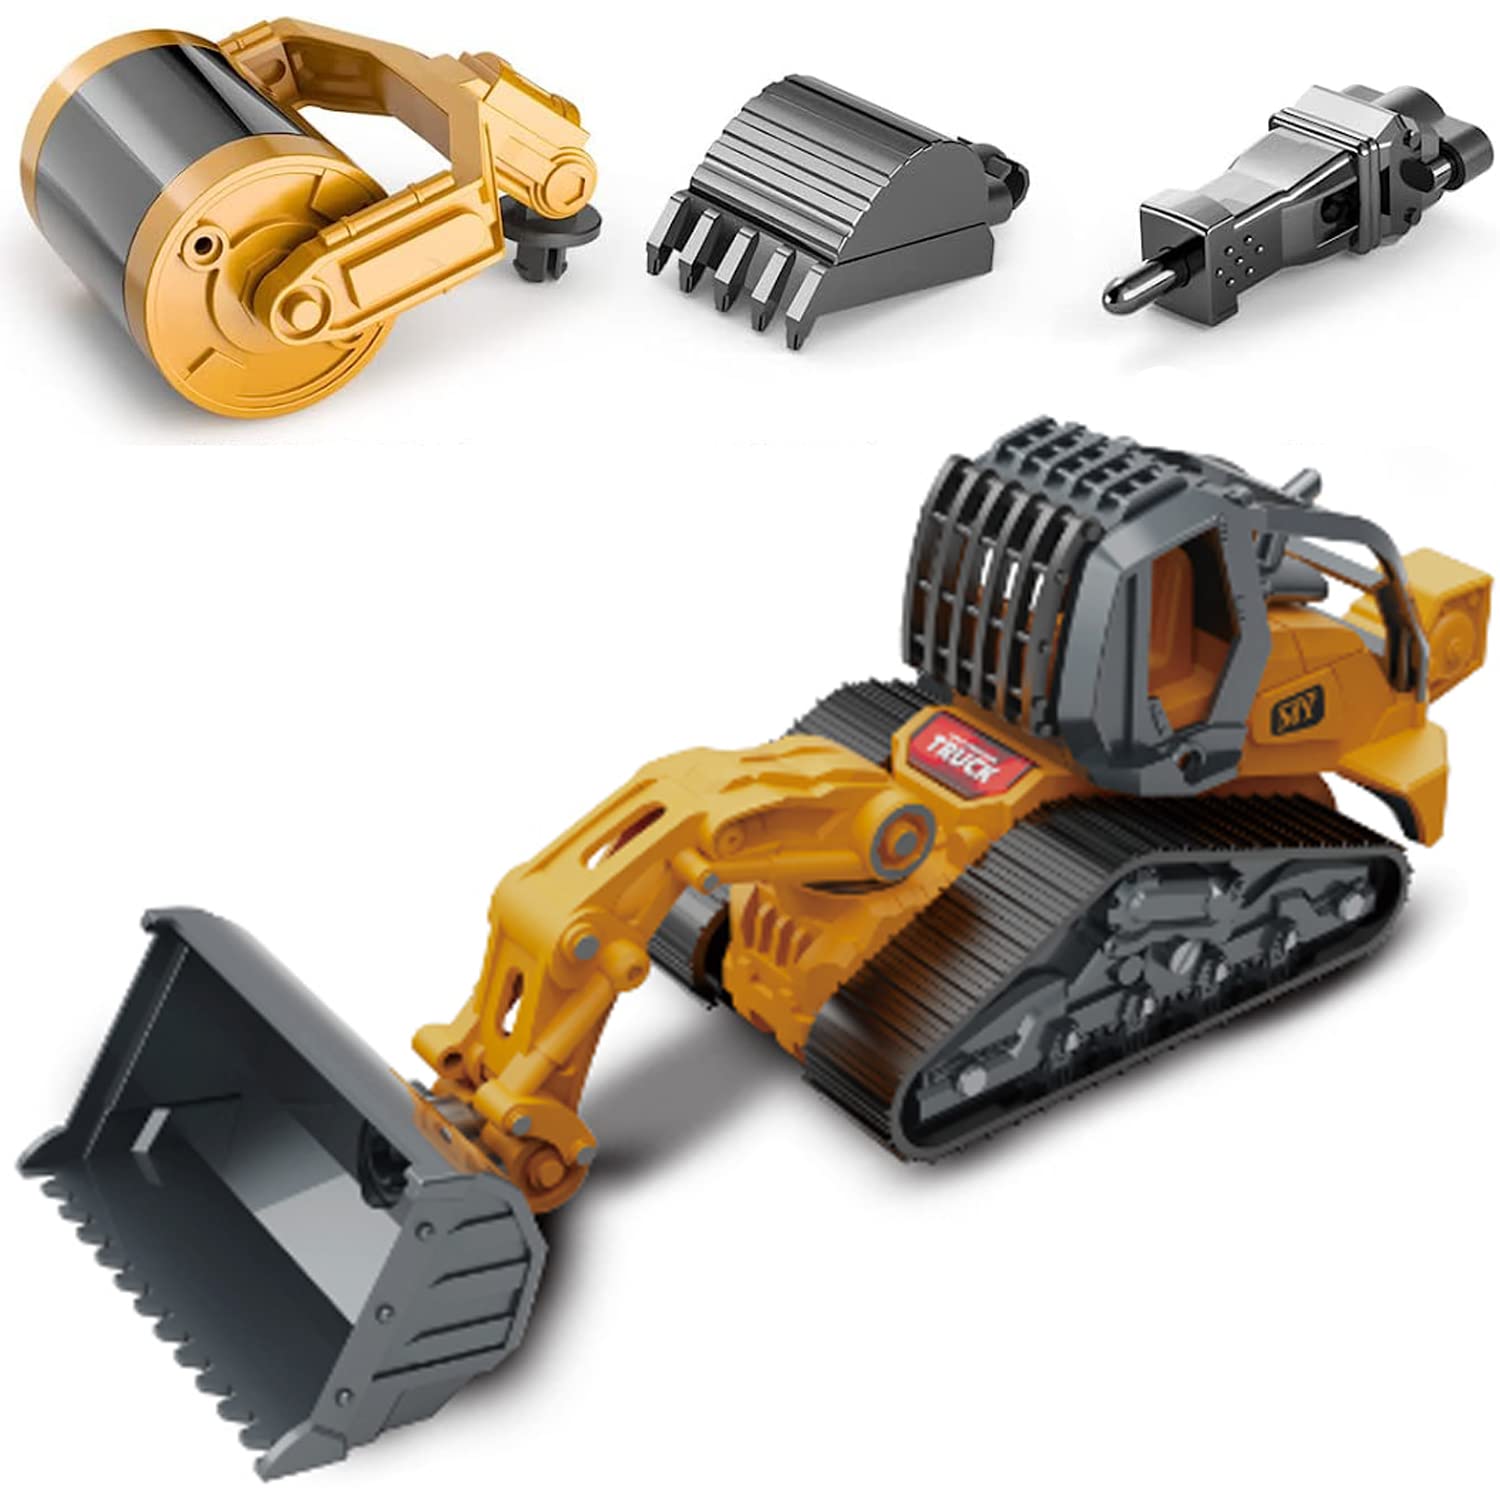 Gemini&Genius Construction Truck 4 in 1 Excavator with Metal Loader Shovel, Roller Shovel and Impact Hammer Construction Vehicle Die-cast Toys for Kids (Wheeled with Tracked)